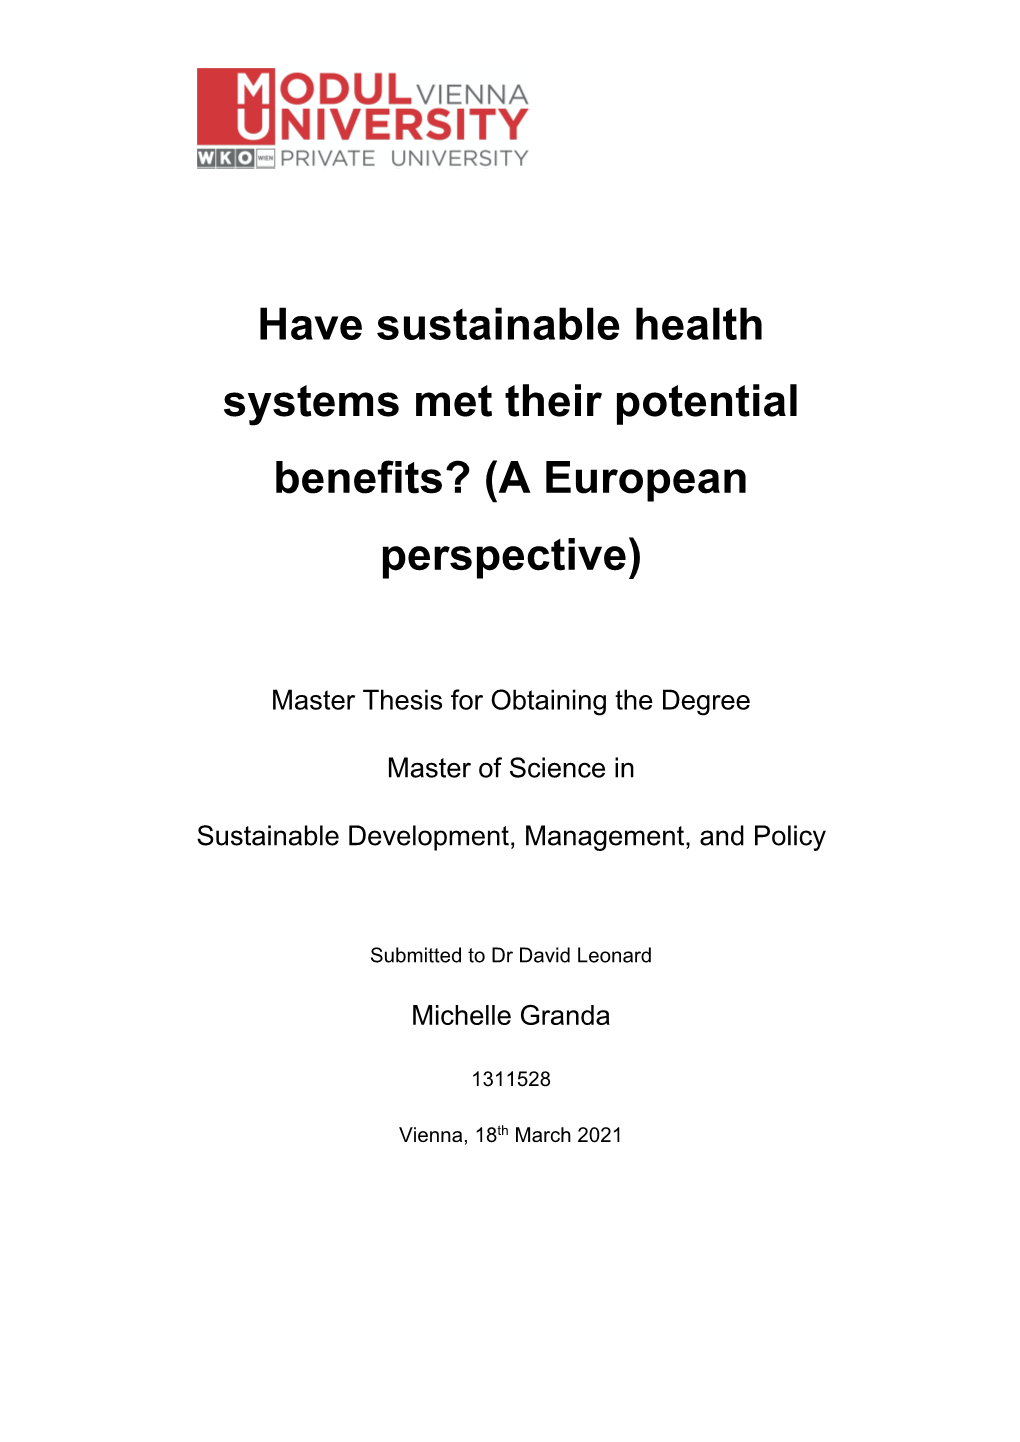 Have Sustainable Health Systems Met Their Potential Benefits? (A European Perspective)